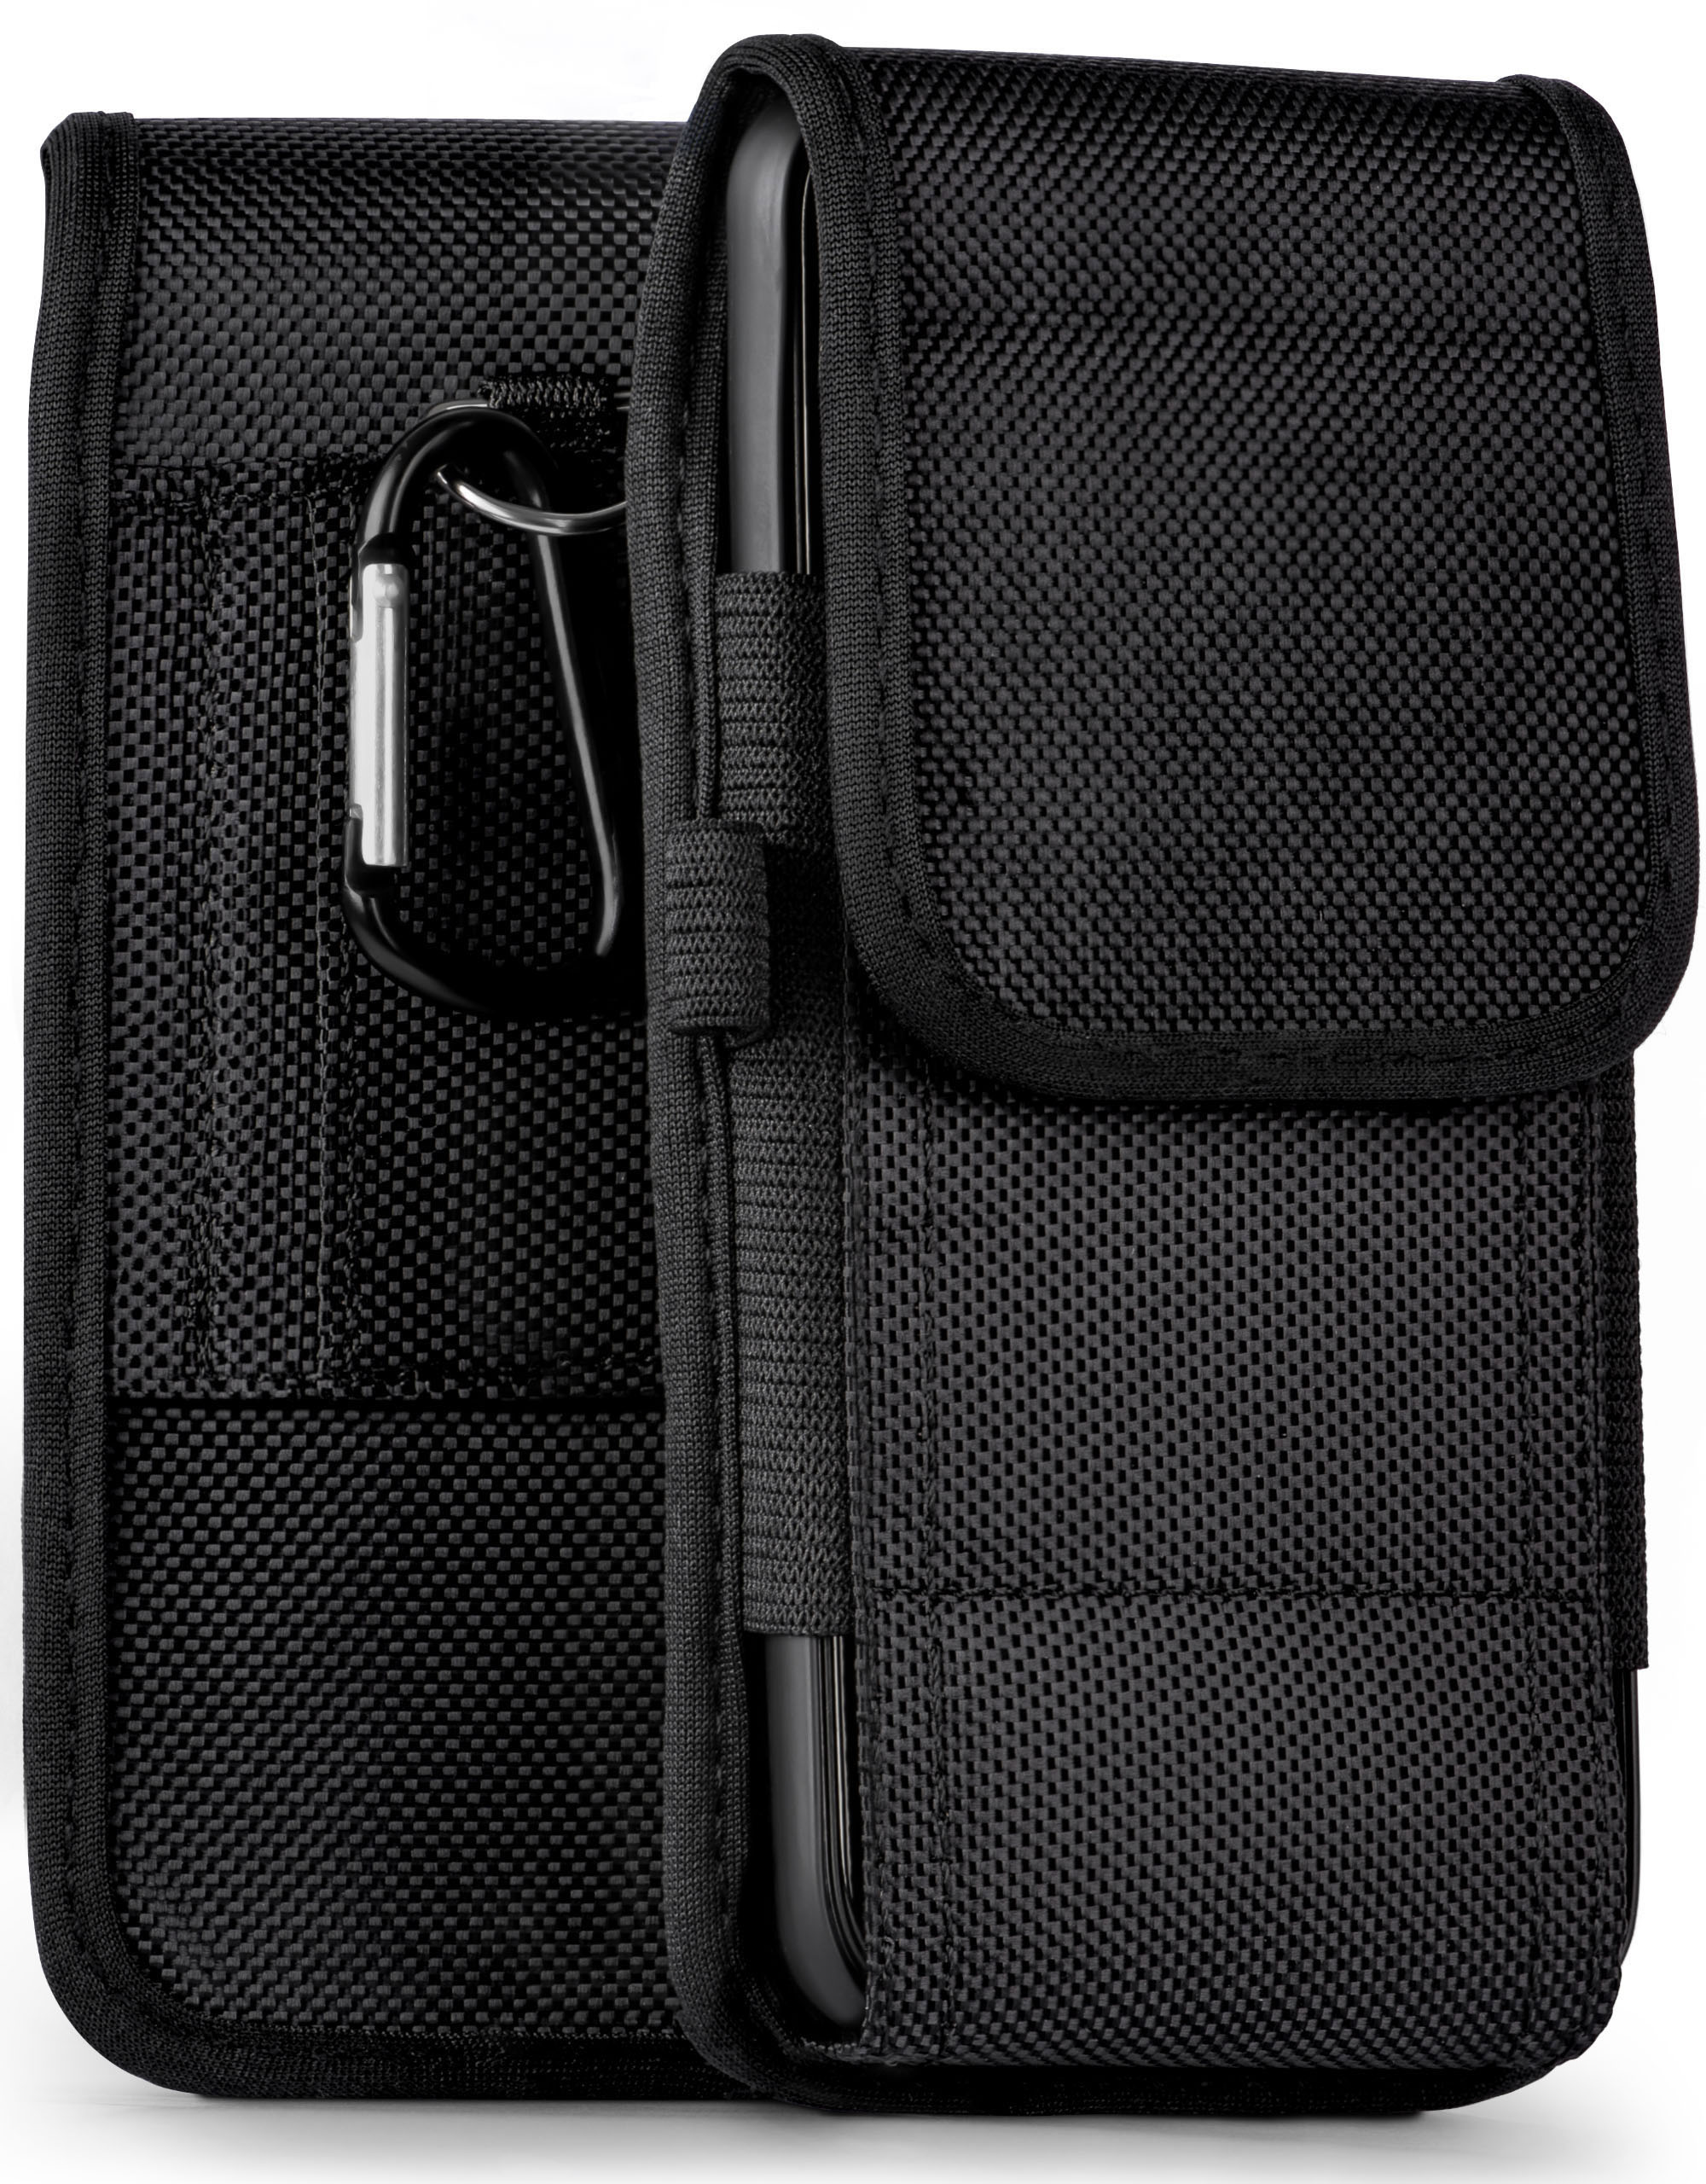 Pro, MOEX 20 Agility Honor, Case, Holster, Trail